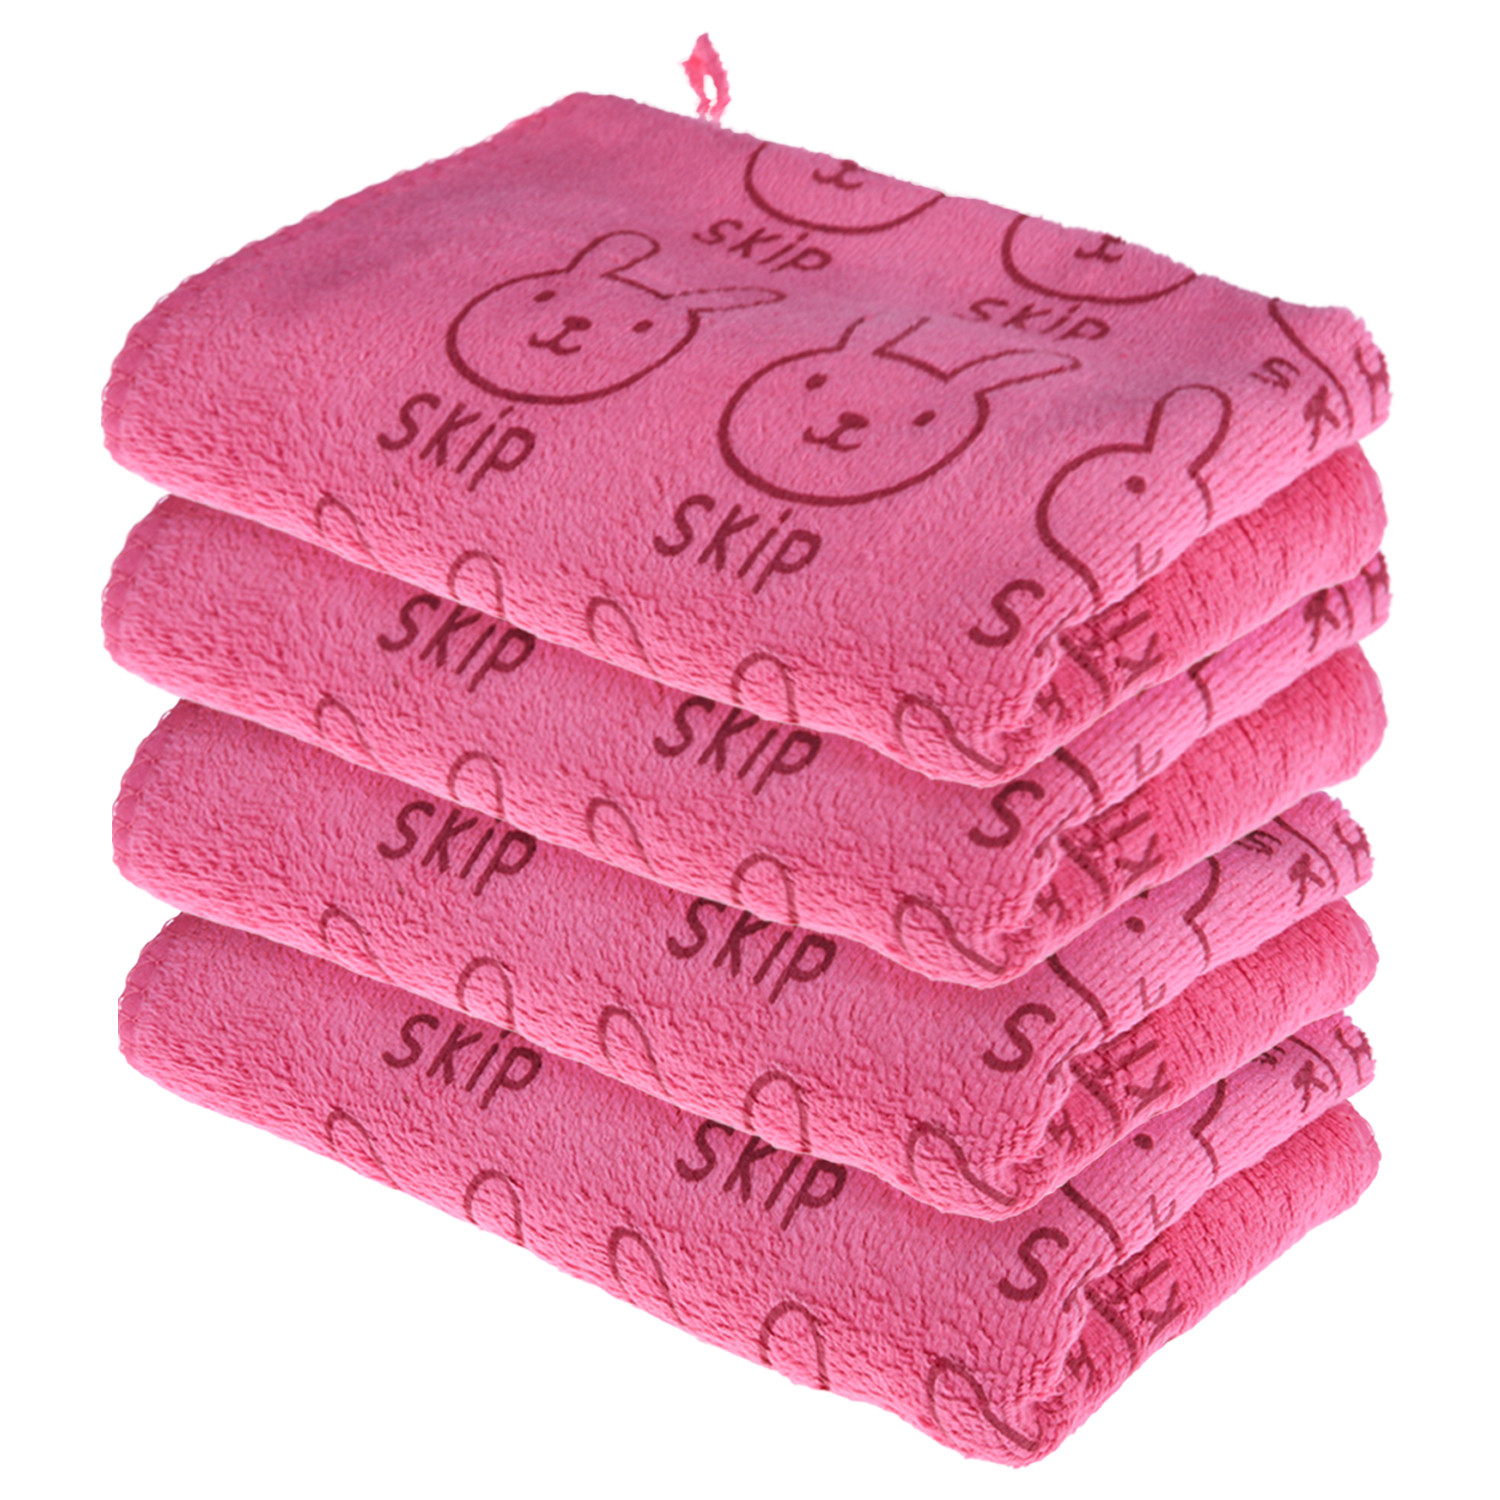 Kuber Industries Cleaning Towel | Reusable Cleaning Towel for Baby | Duster Towel for Home Cleaning | Skip Cleaning Cloth Towel with Hanging Loop | 30x40 |Pink